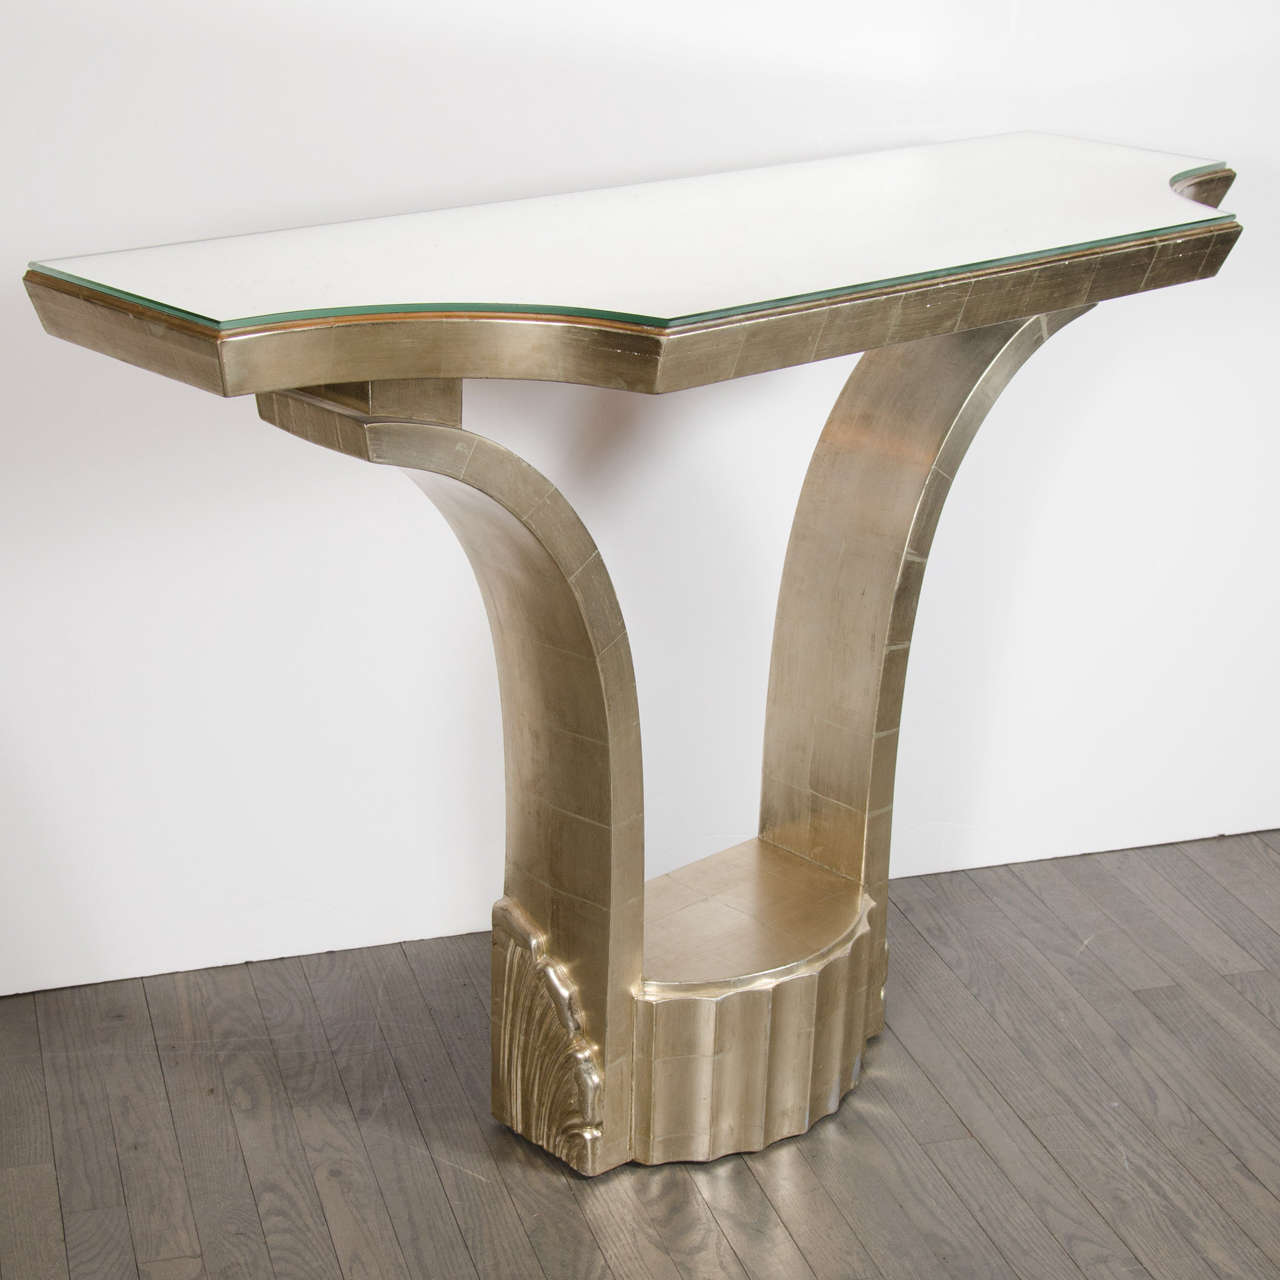 This jaw dropping console is a one of a kind piece. From the 1940's Hollywood Regency period, it has been designed with 24 karat white gold leafing, and  antiqued beveled mirror top showcasing it's stunning details and craftsmanship. It is in